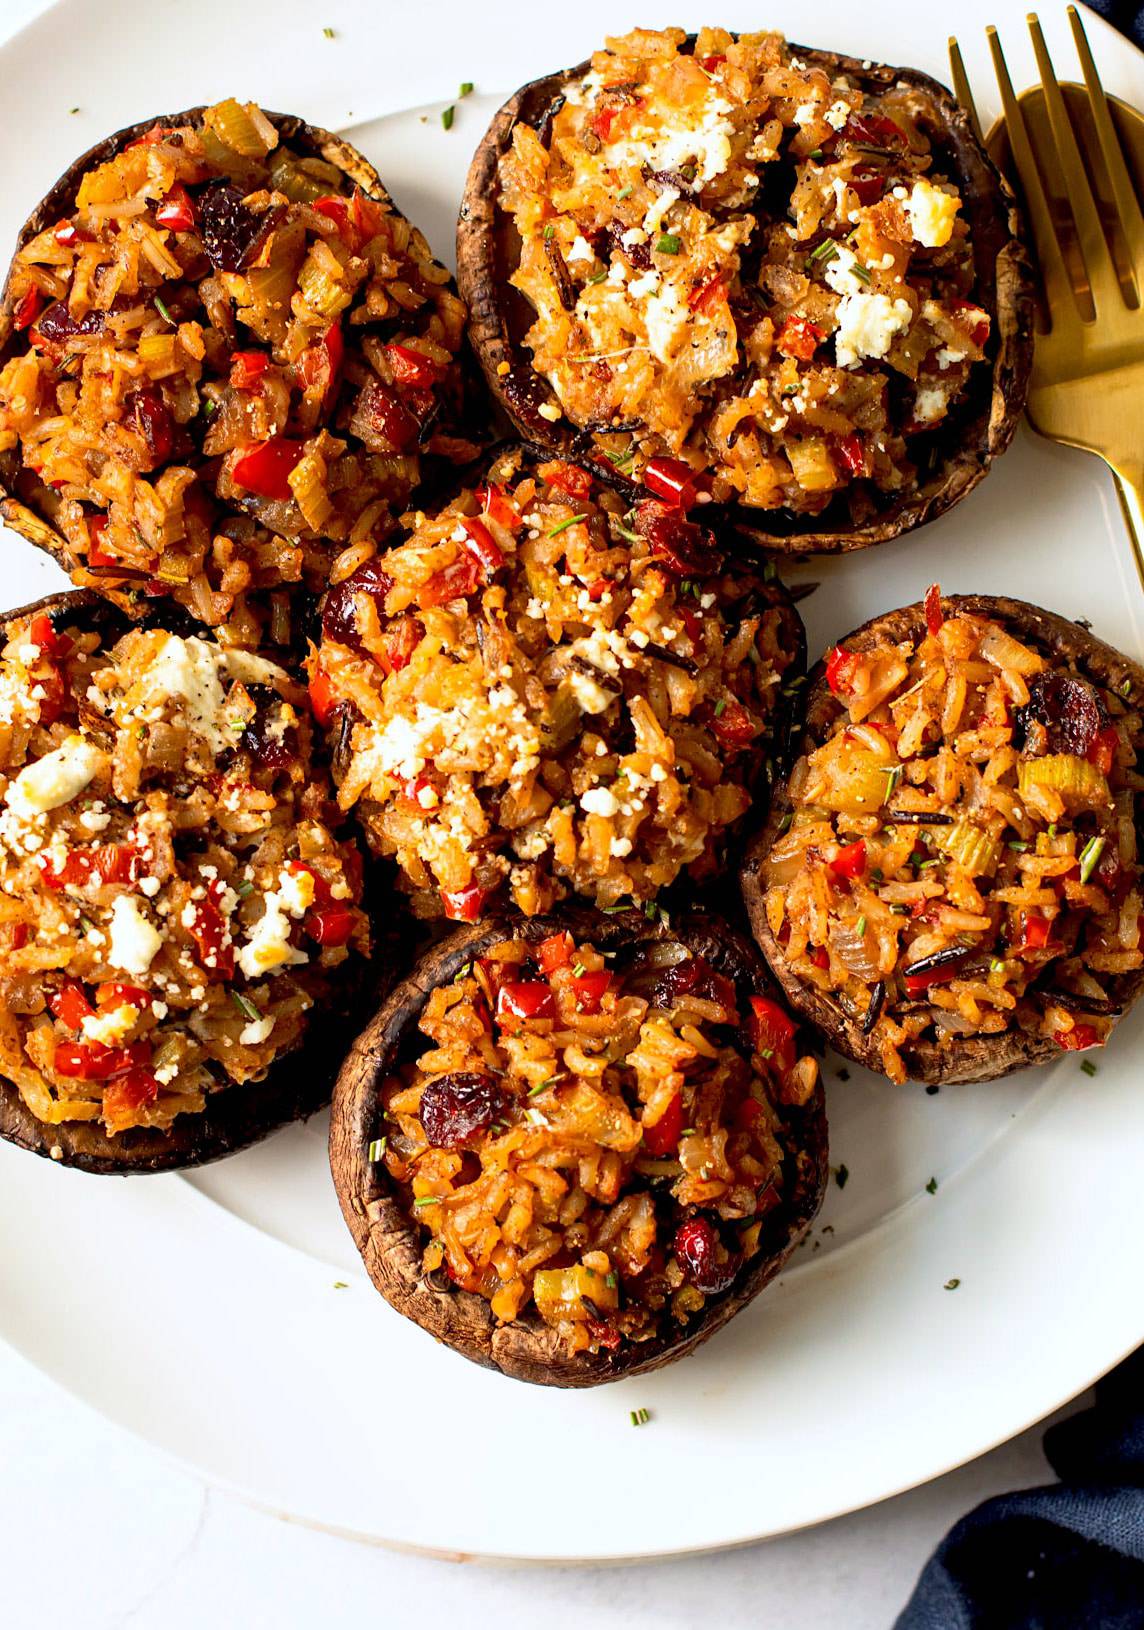 Meatless stuffed mushrooms for a holiday on a plate.